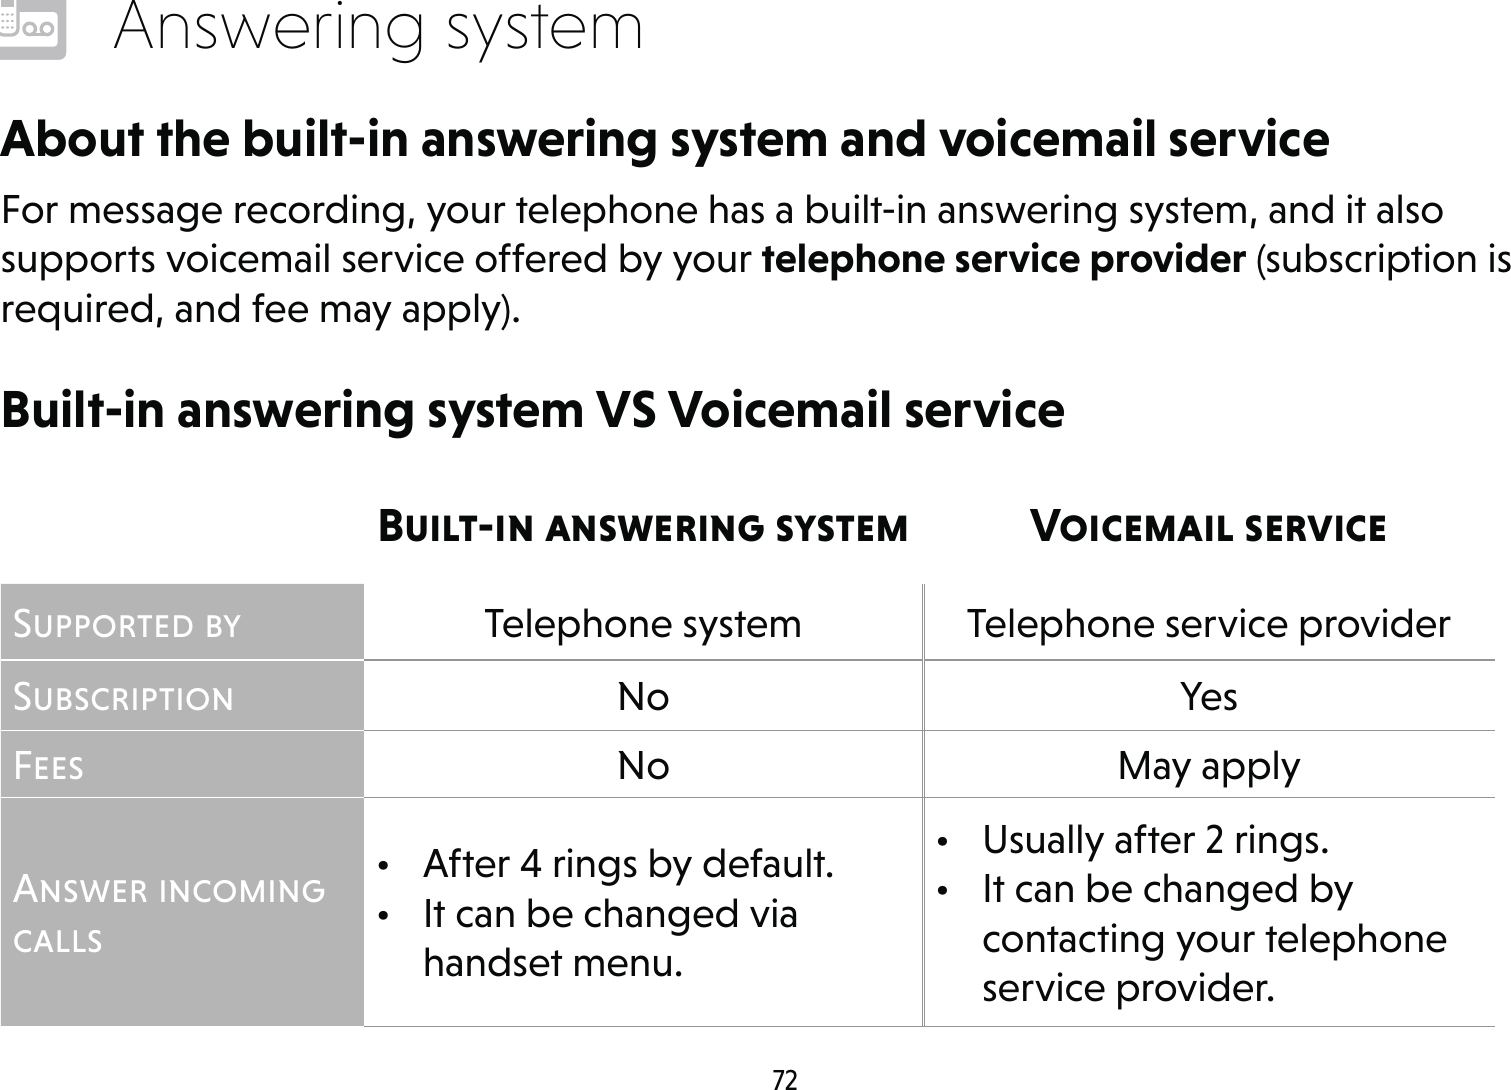 72Answering systemAbout the built-in answering system and voicemail serviceFor message recording, your telephone has a built-in answering system, and it also supports voicemail service offered by your telephone service provider (subscription is required, and fee may apply).Built-in answering system VS Voicemail serviceBuilt-in answering system Voicemail serviceSupported by Telephone system Telephone service providerSubscription No YesFees No May applyAnswer incoming calls•  After 4 rings by default.•  It can be changed via handset menu.•  Usually after 2 rings.•  It can be changed by contacting your telephone service provider.